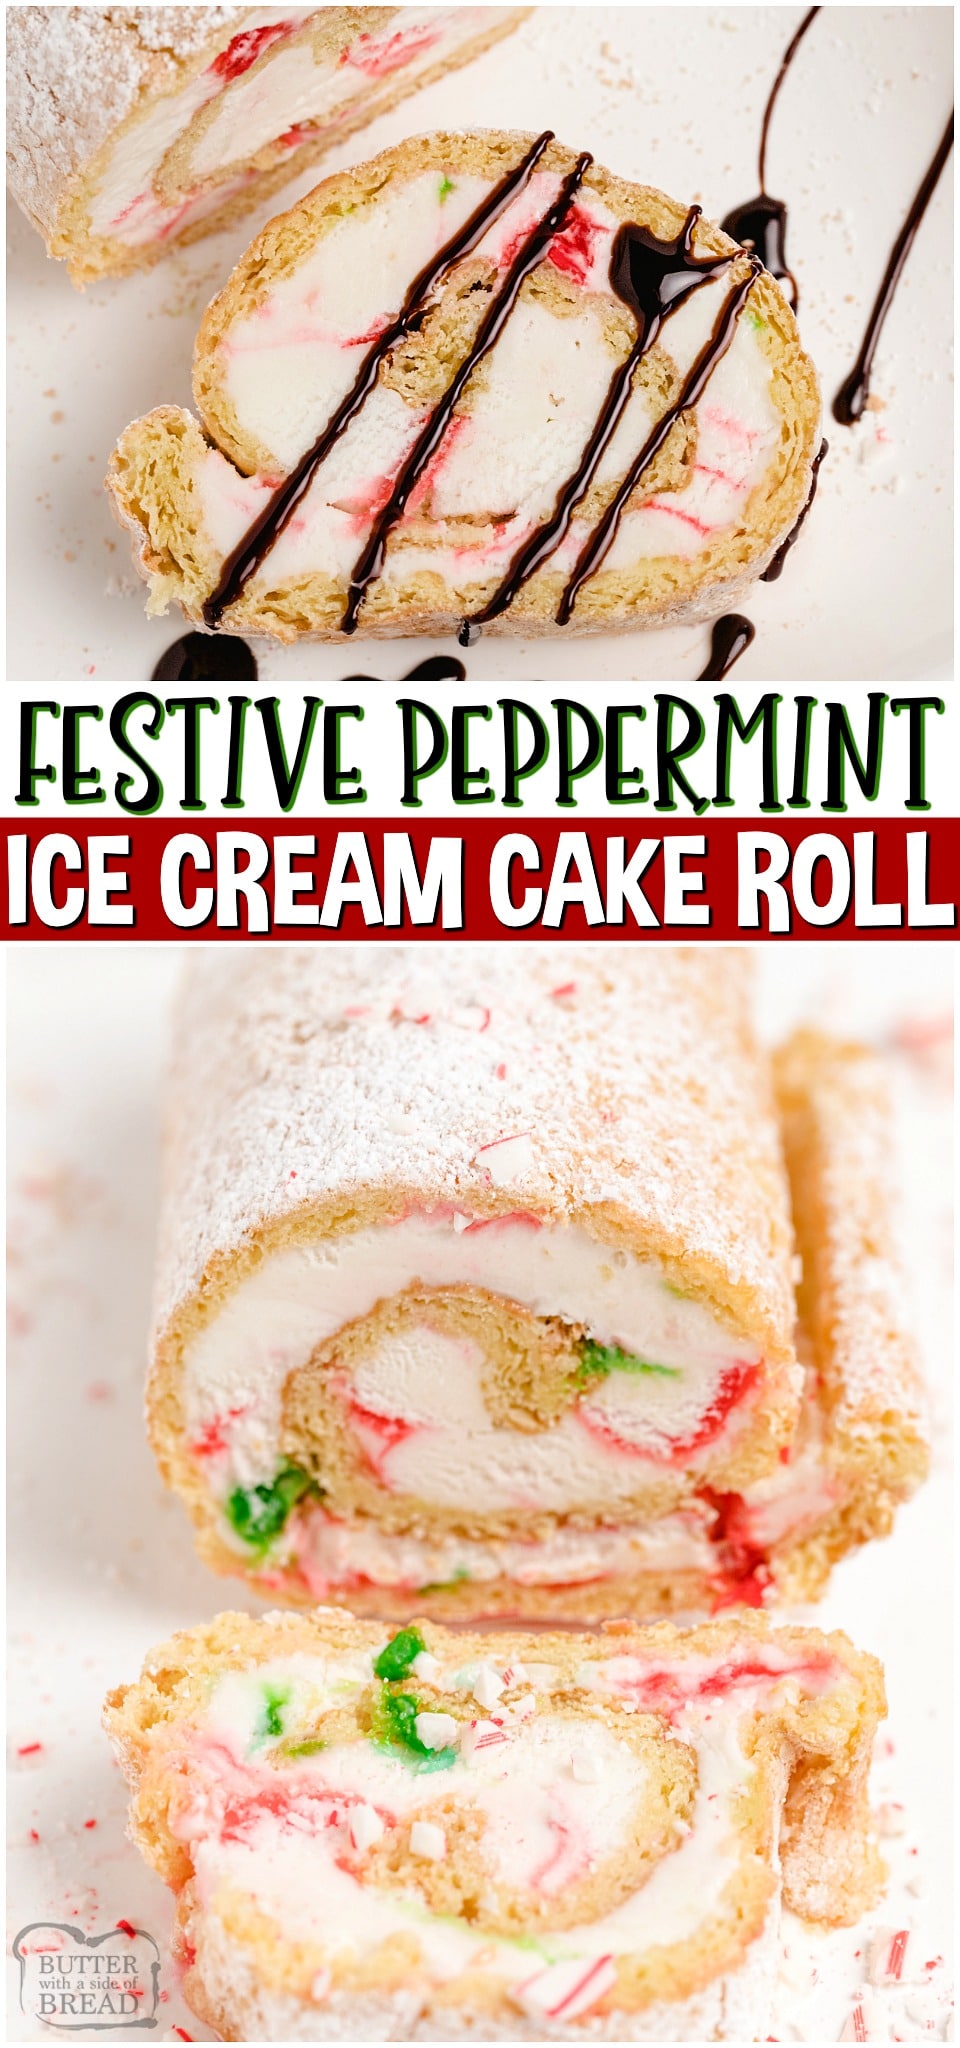 Holiday Peppermint Ice Cream Cake Roll is festive, show stopping dessert that's perfect for your Christmas table! Cake Roll recipe made with peppermint Ice Cream rolled in sweet, soft vanilla cake, sliced & topped with chocolate drizzle.